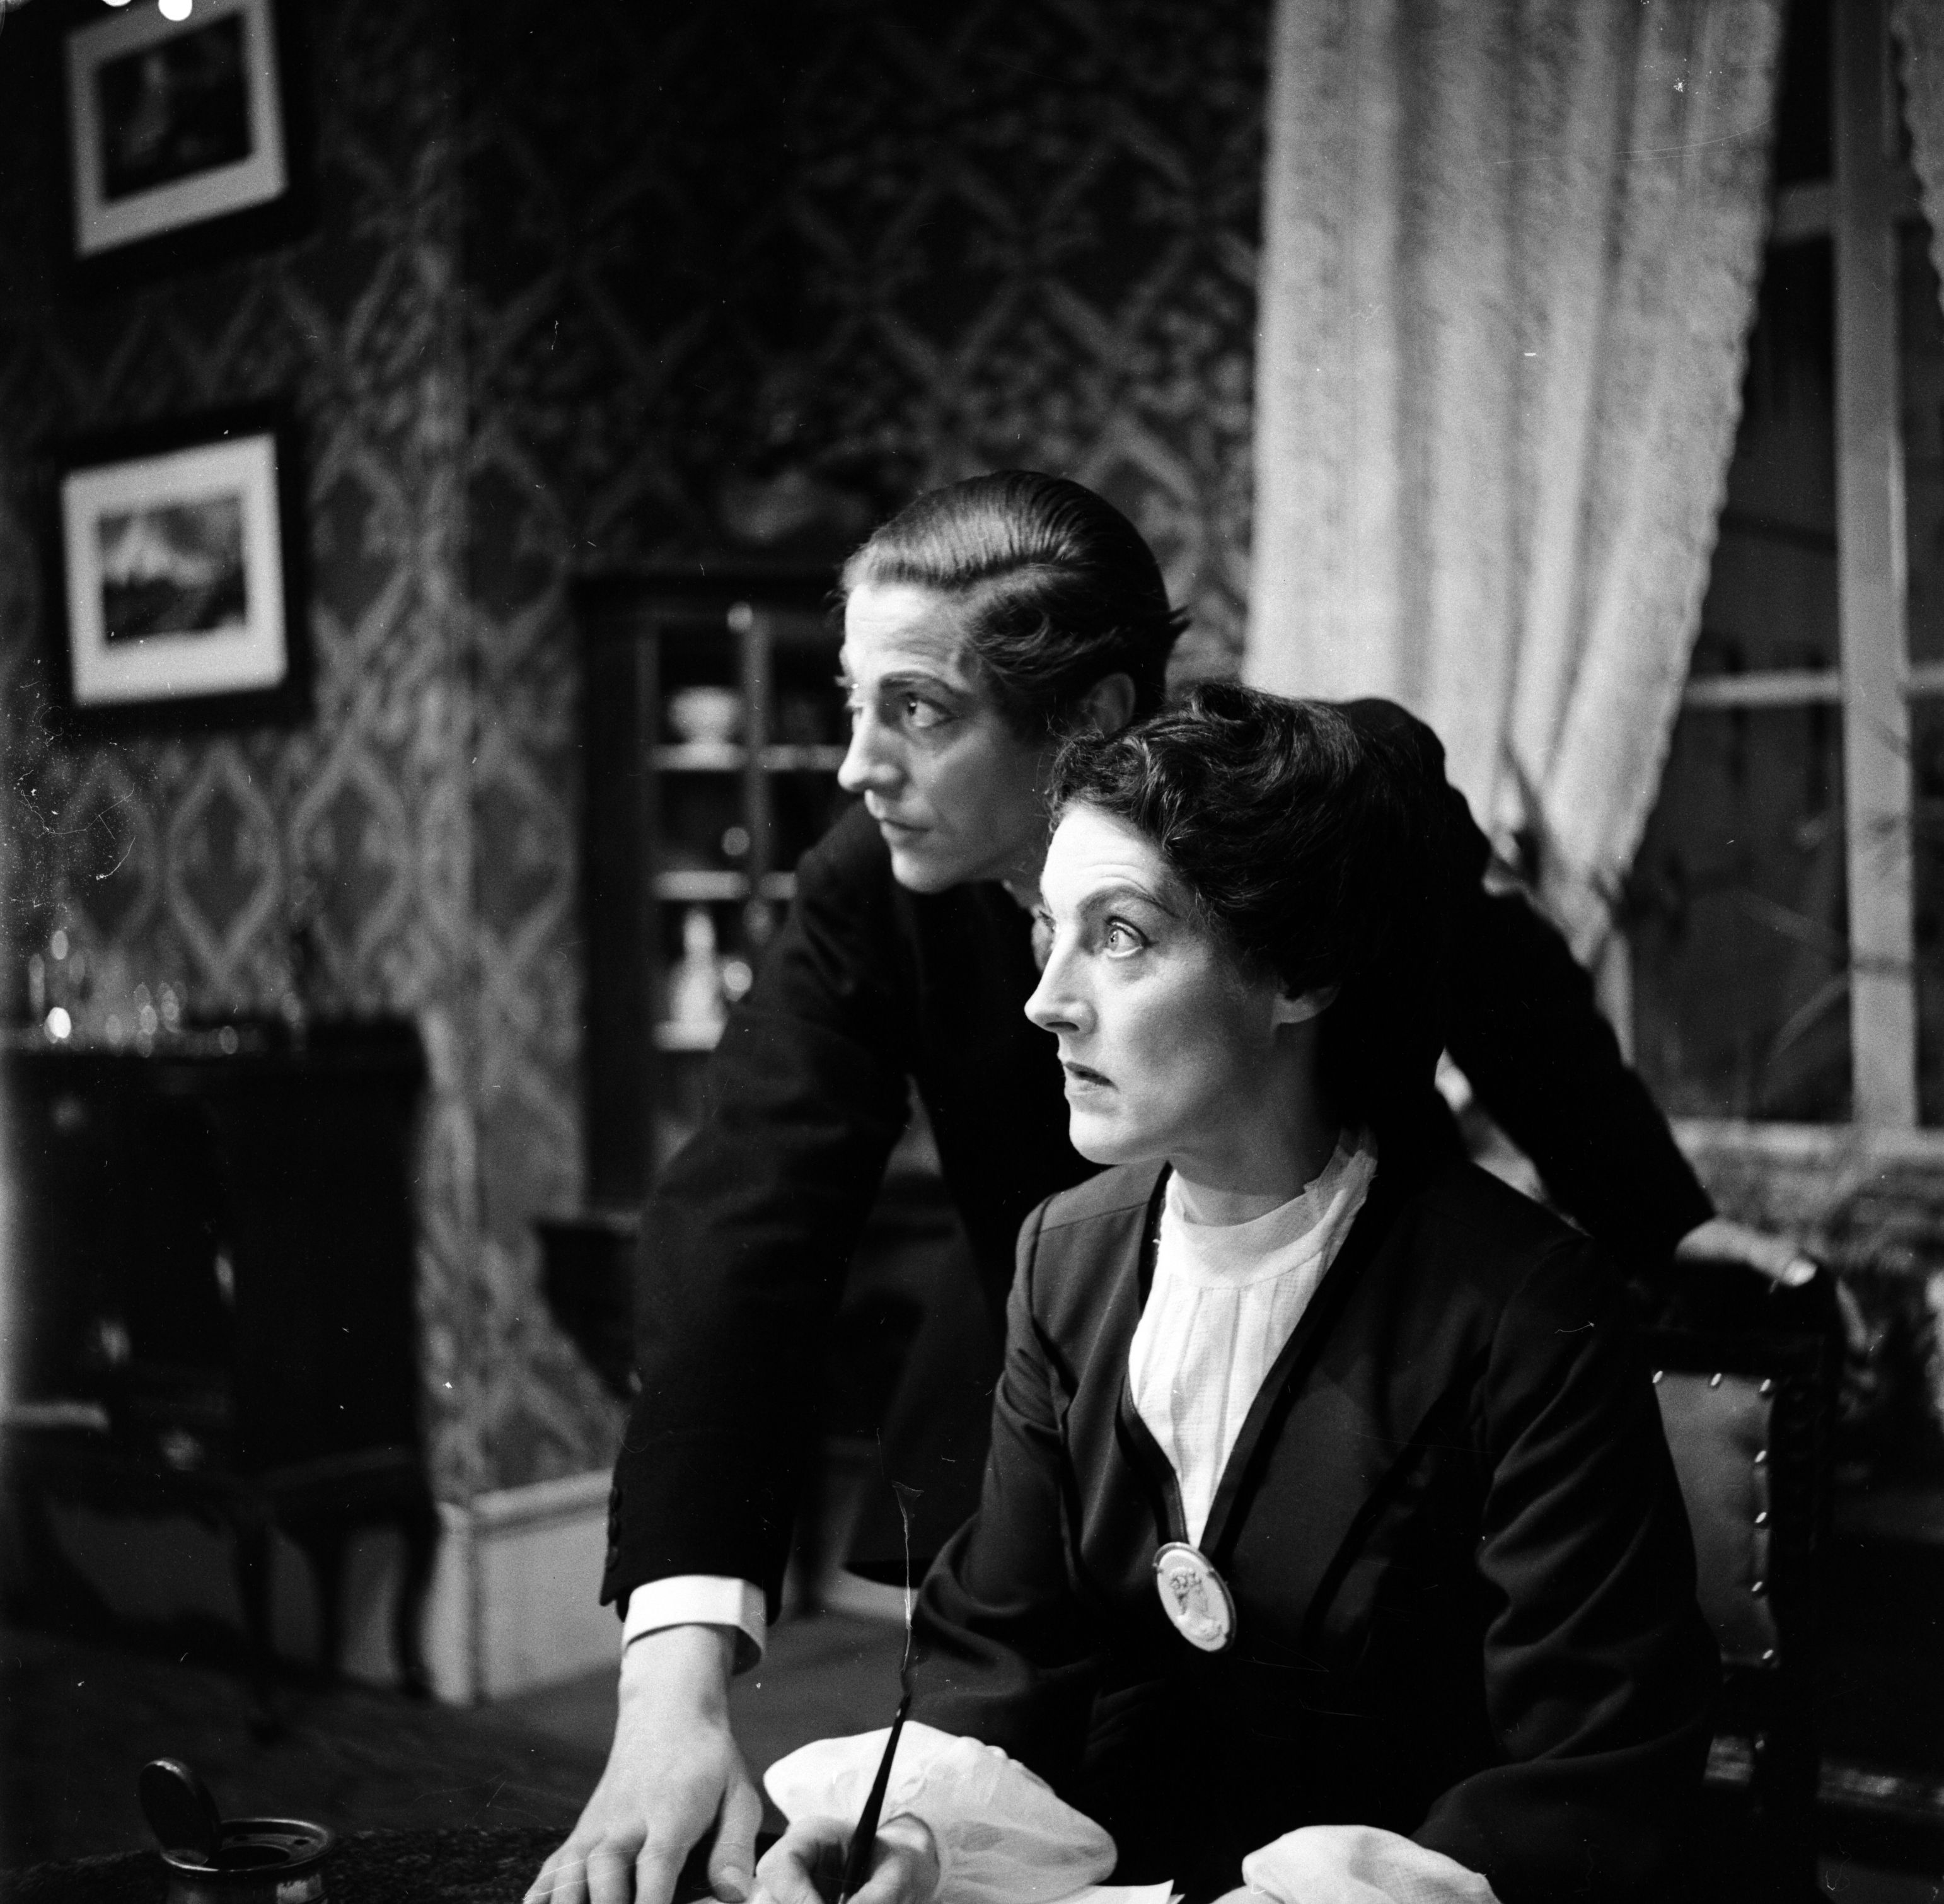 Two actors in a play put on by the Perth Repertory Theatre in Perth, the 'Fair City', formerly the capital of Scotland in 1955.